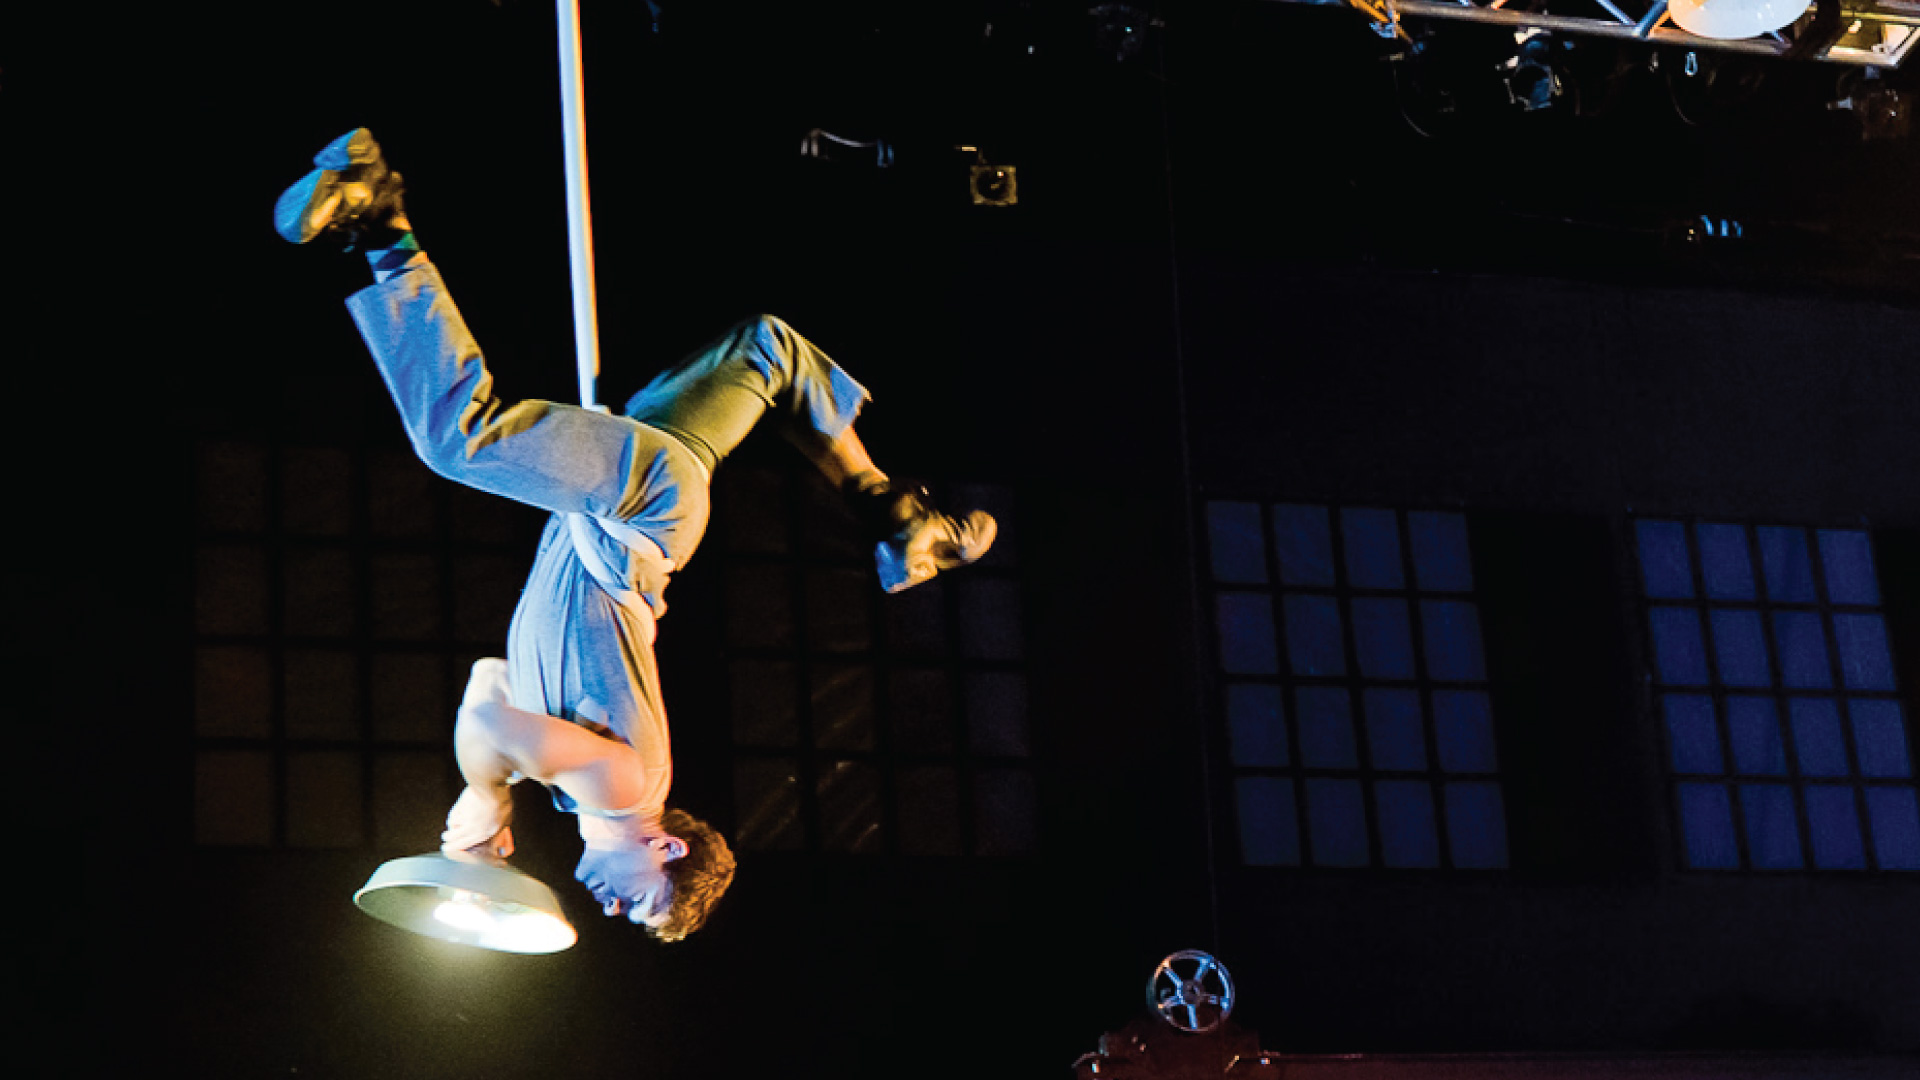 A man wearing a gray jumpsuit hangs upside down with his legs outstretched in the air and has a hanging light wrapped around his waist.